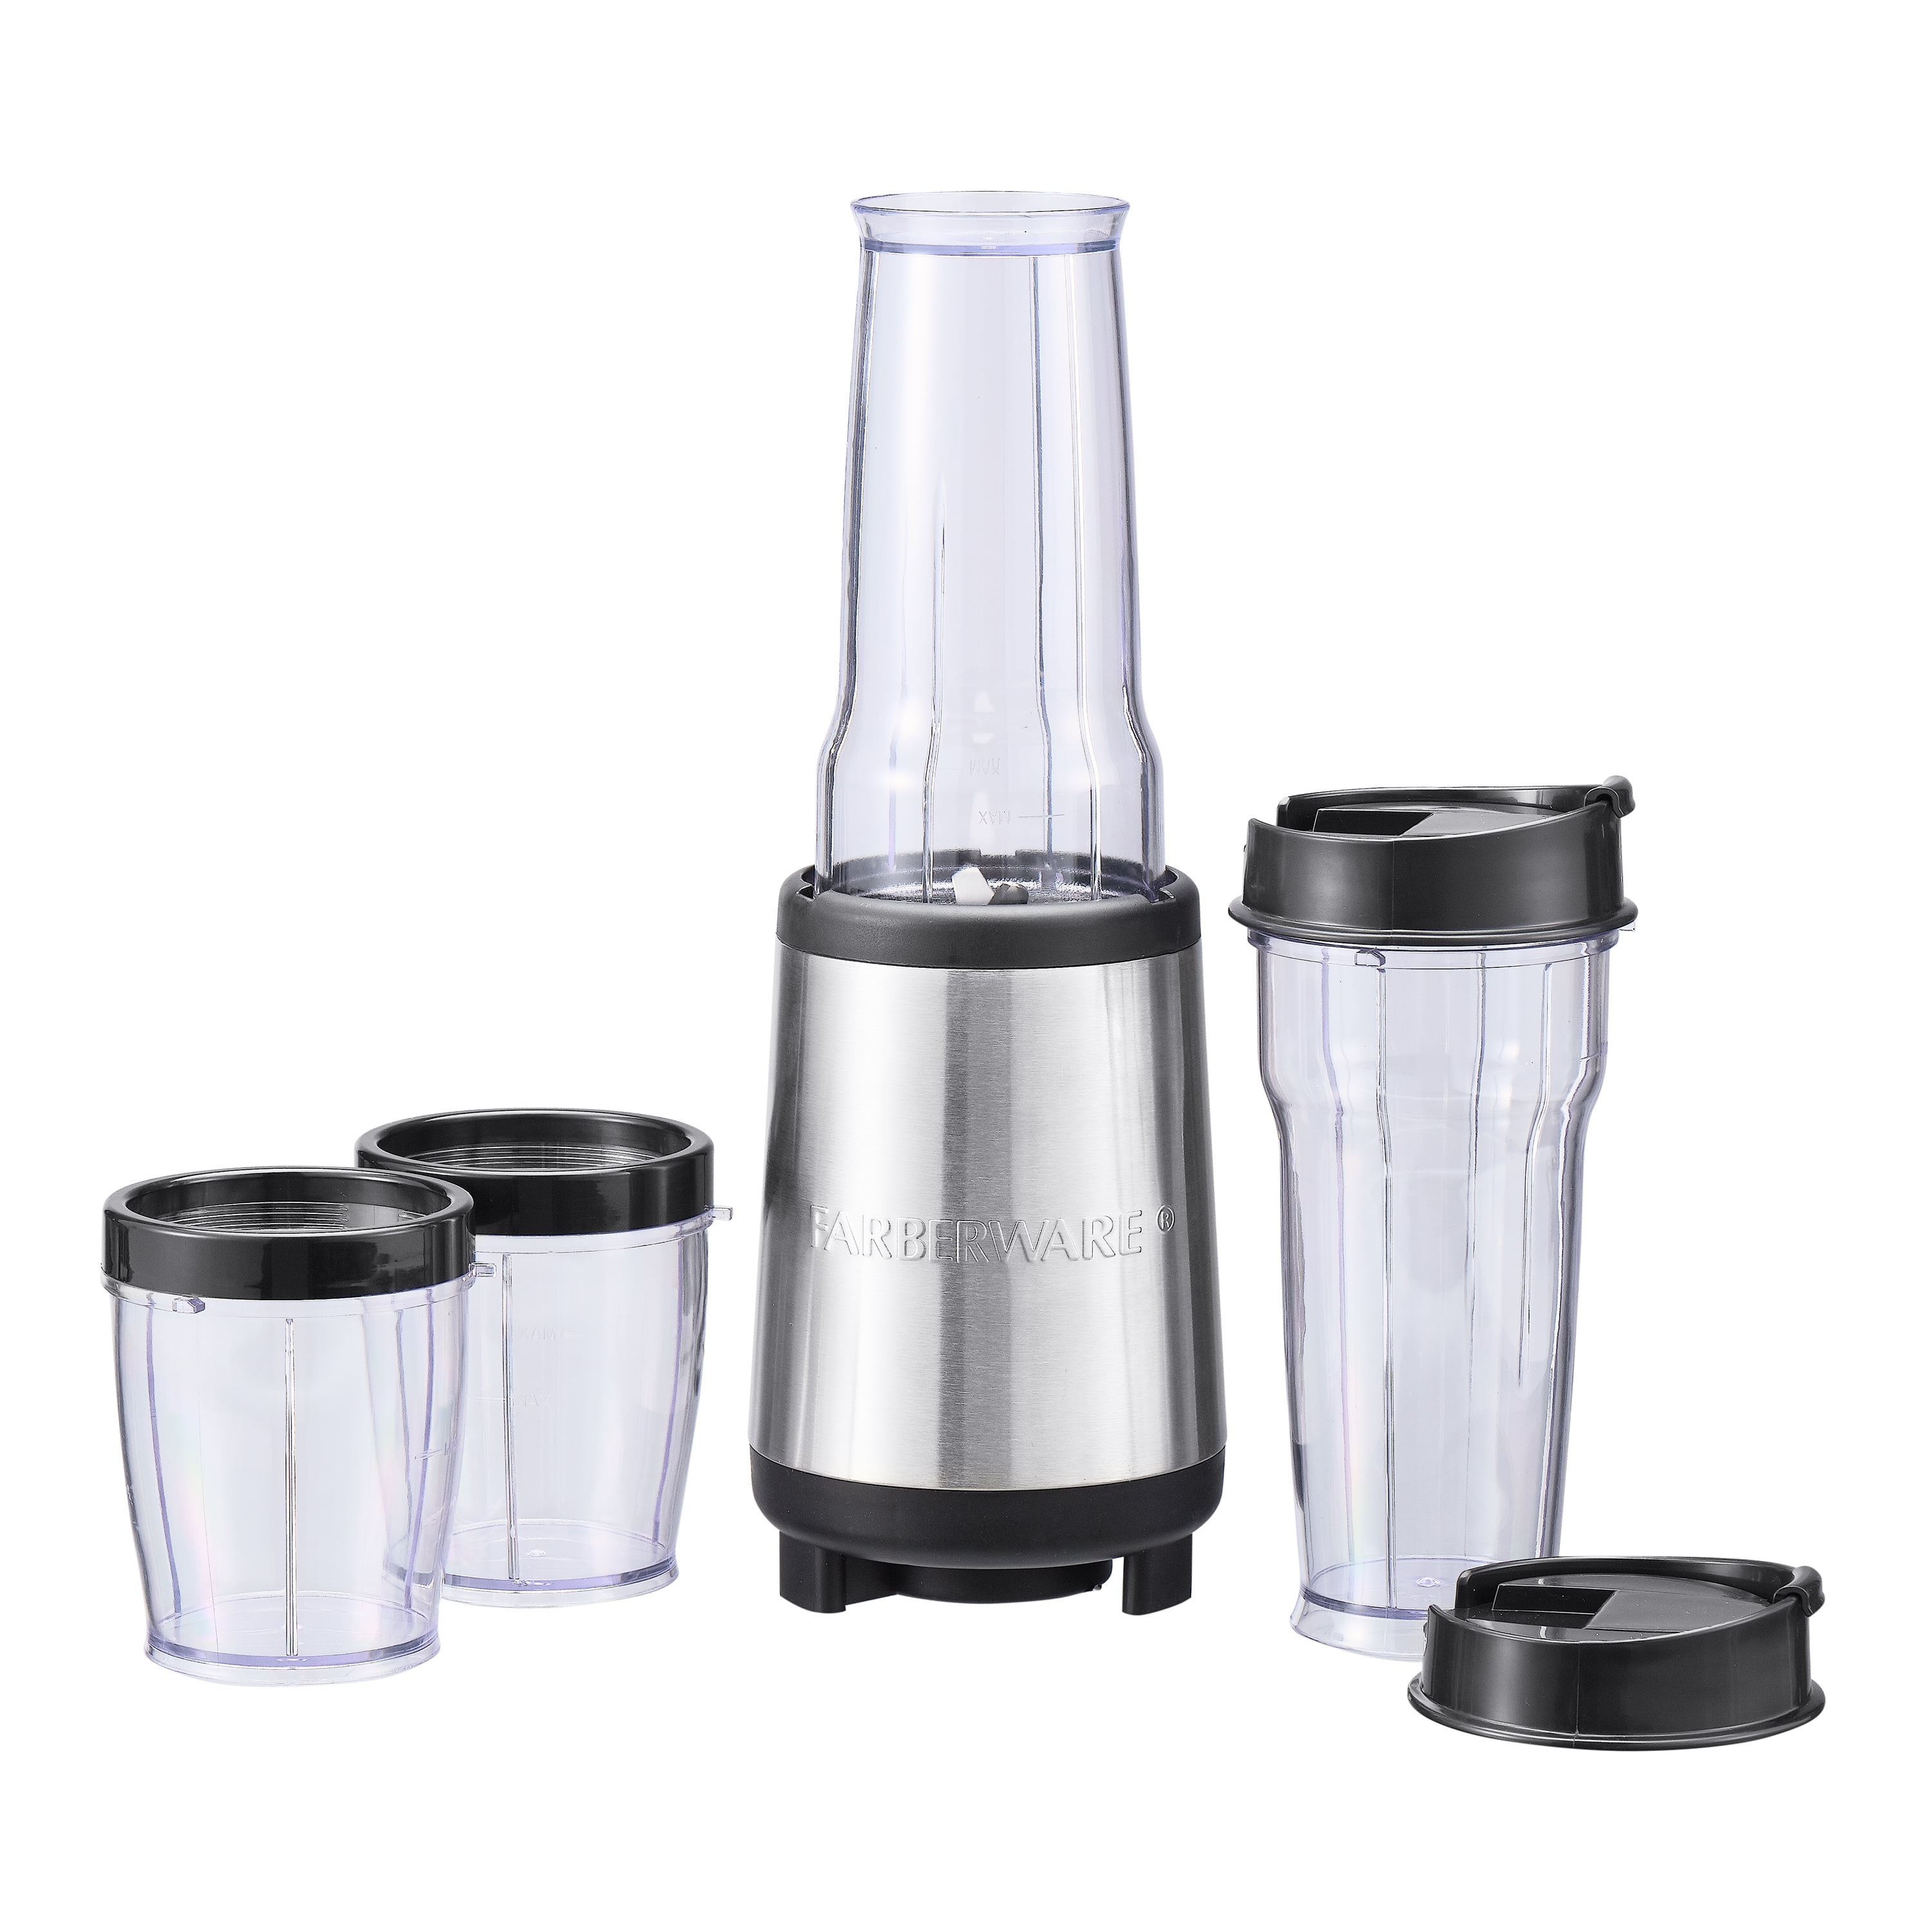 New Farberware brewer & Toastmaster Personal Blender - general for